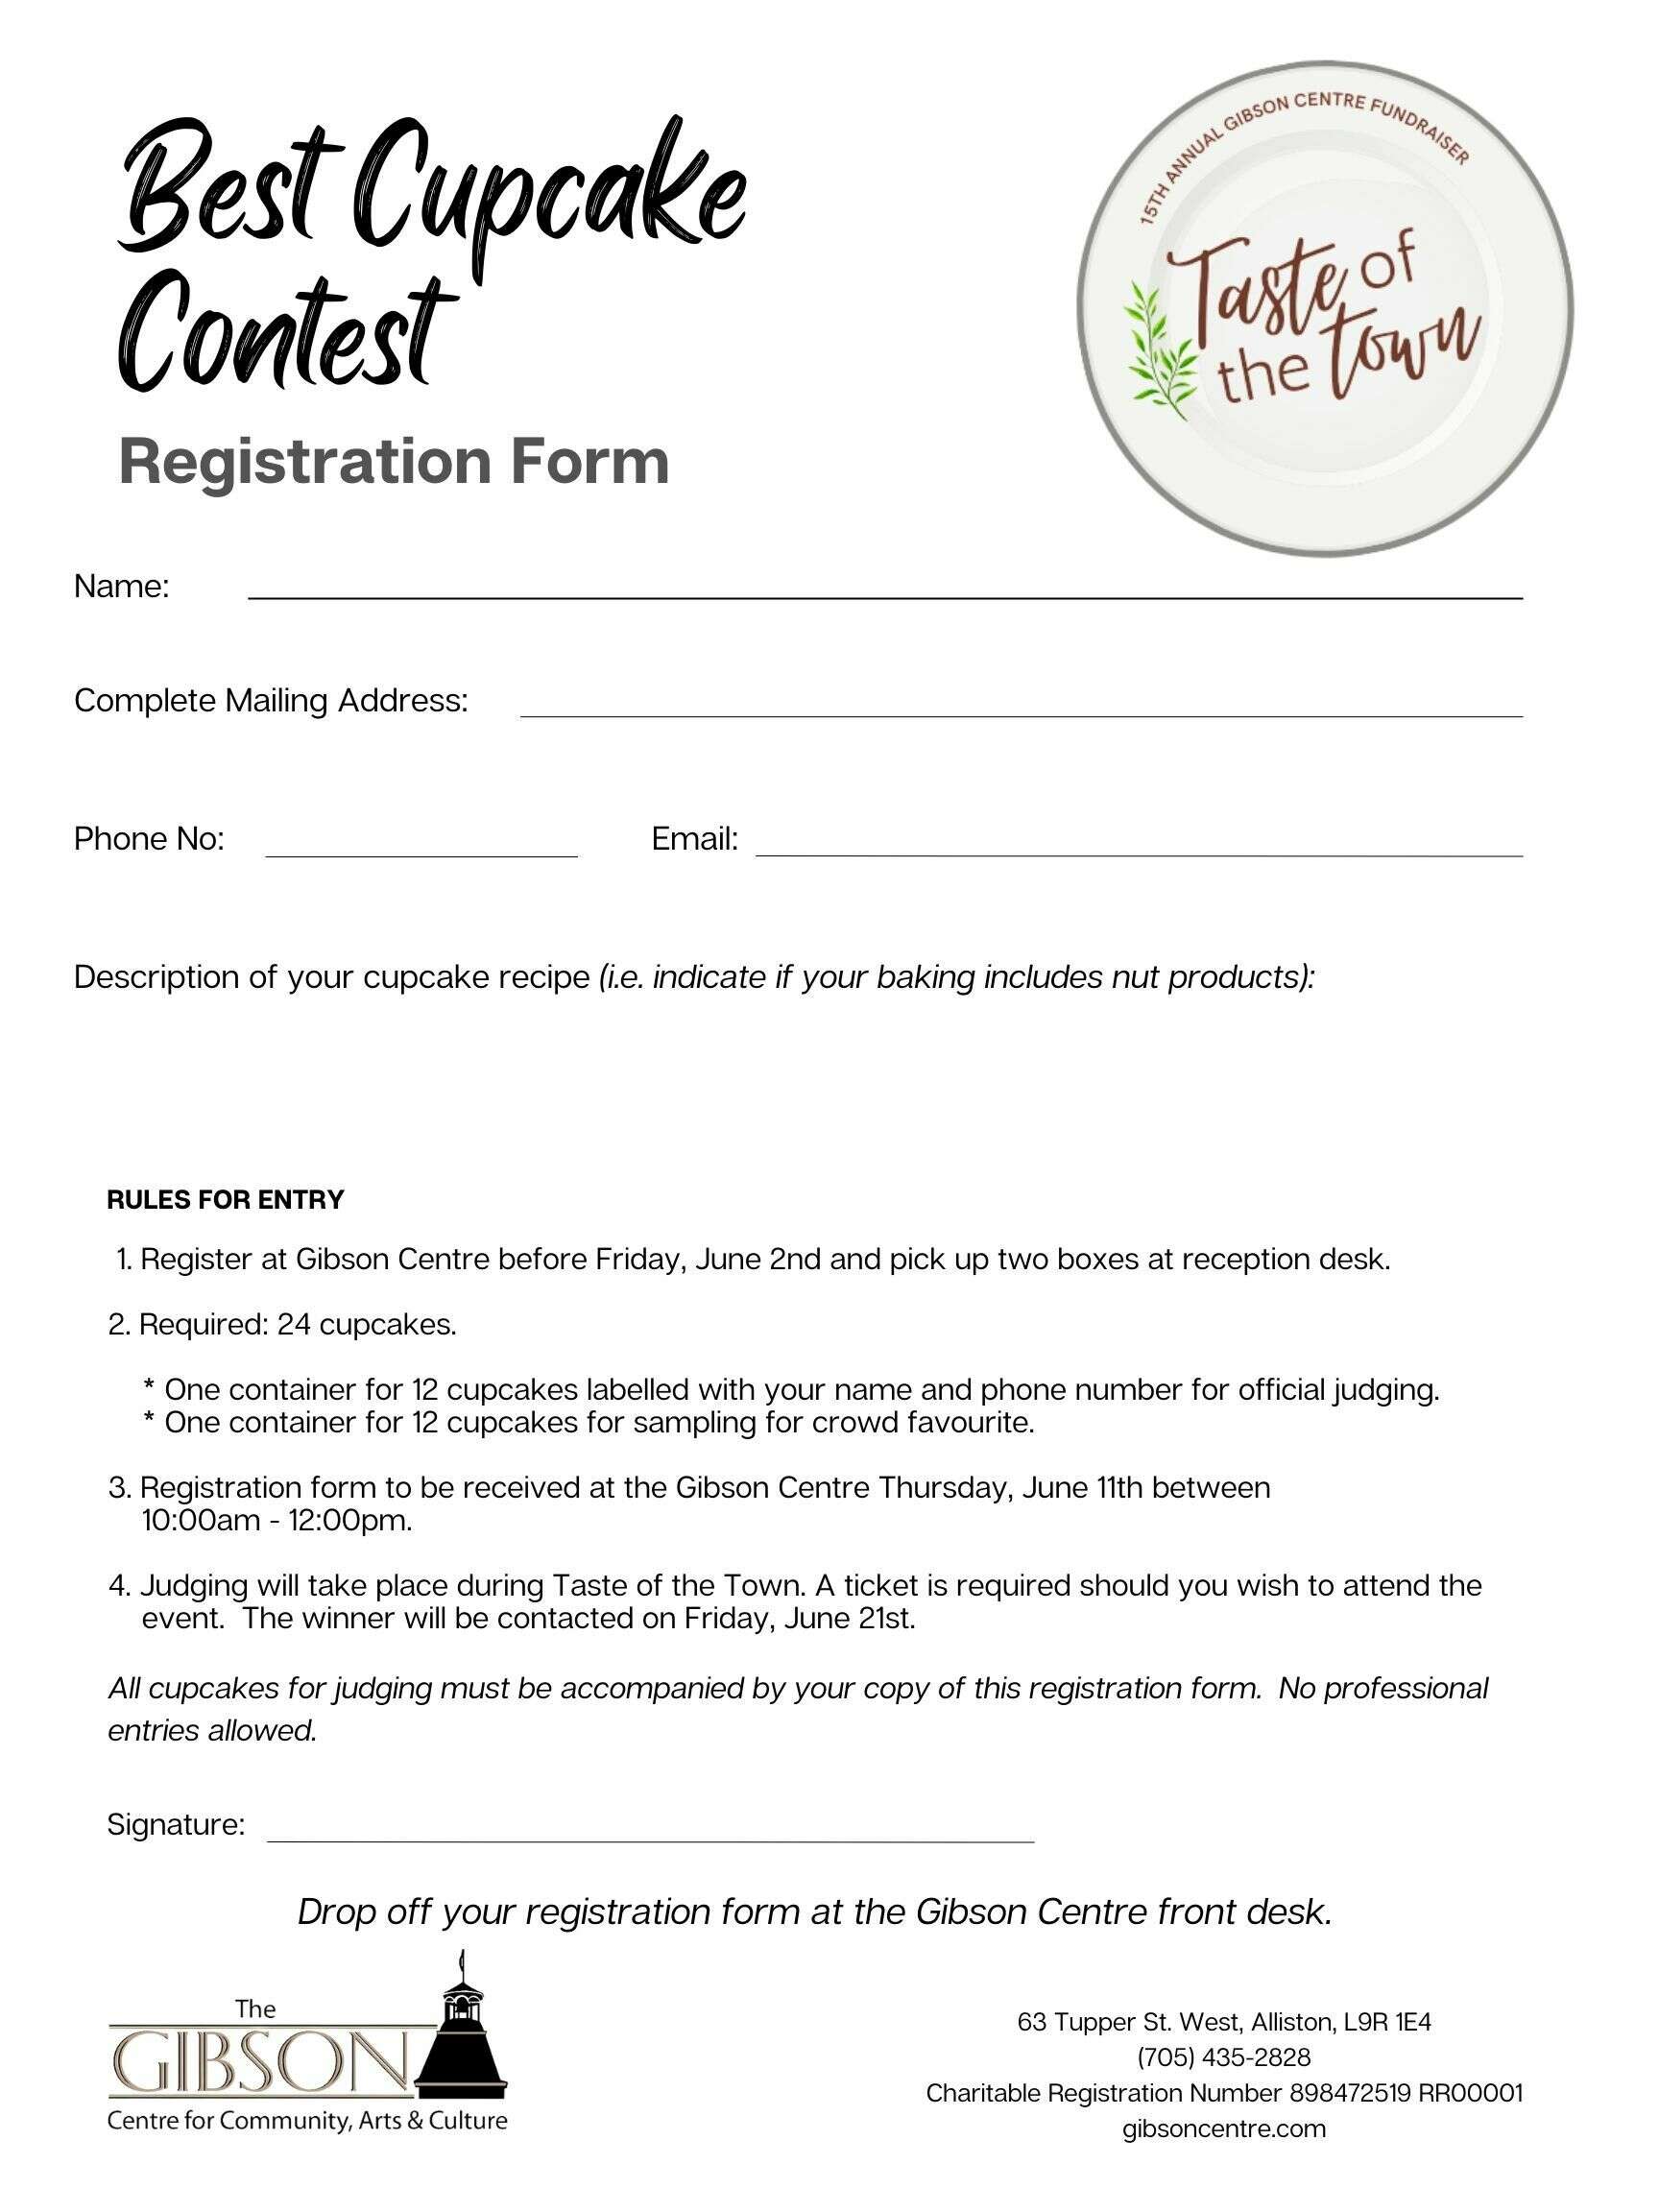 Taste of the Town - Best Cupcake Contest - Best Cupcake Contest Registration Form